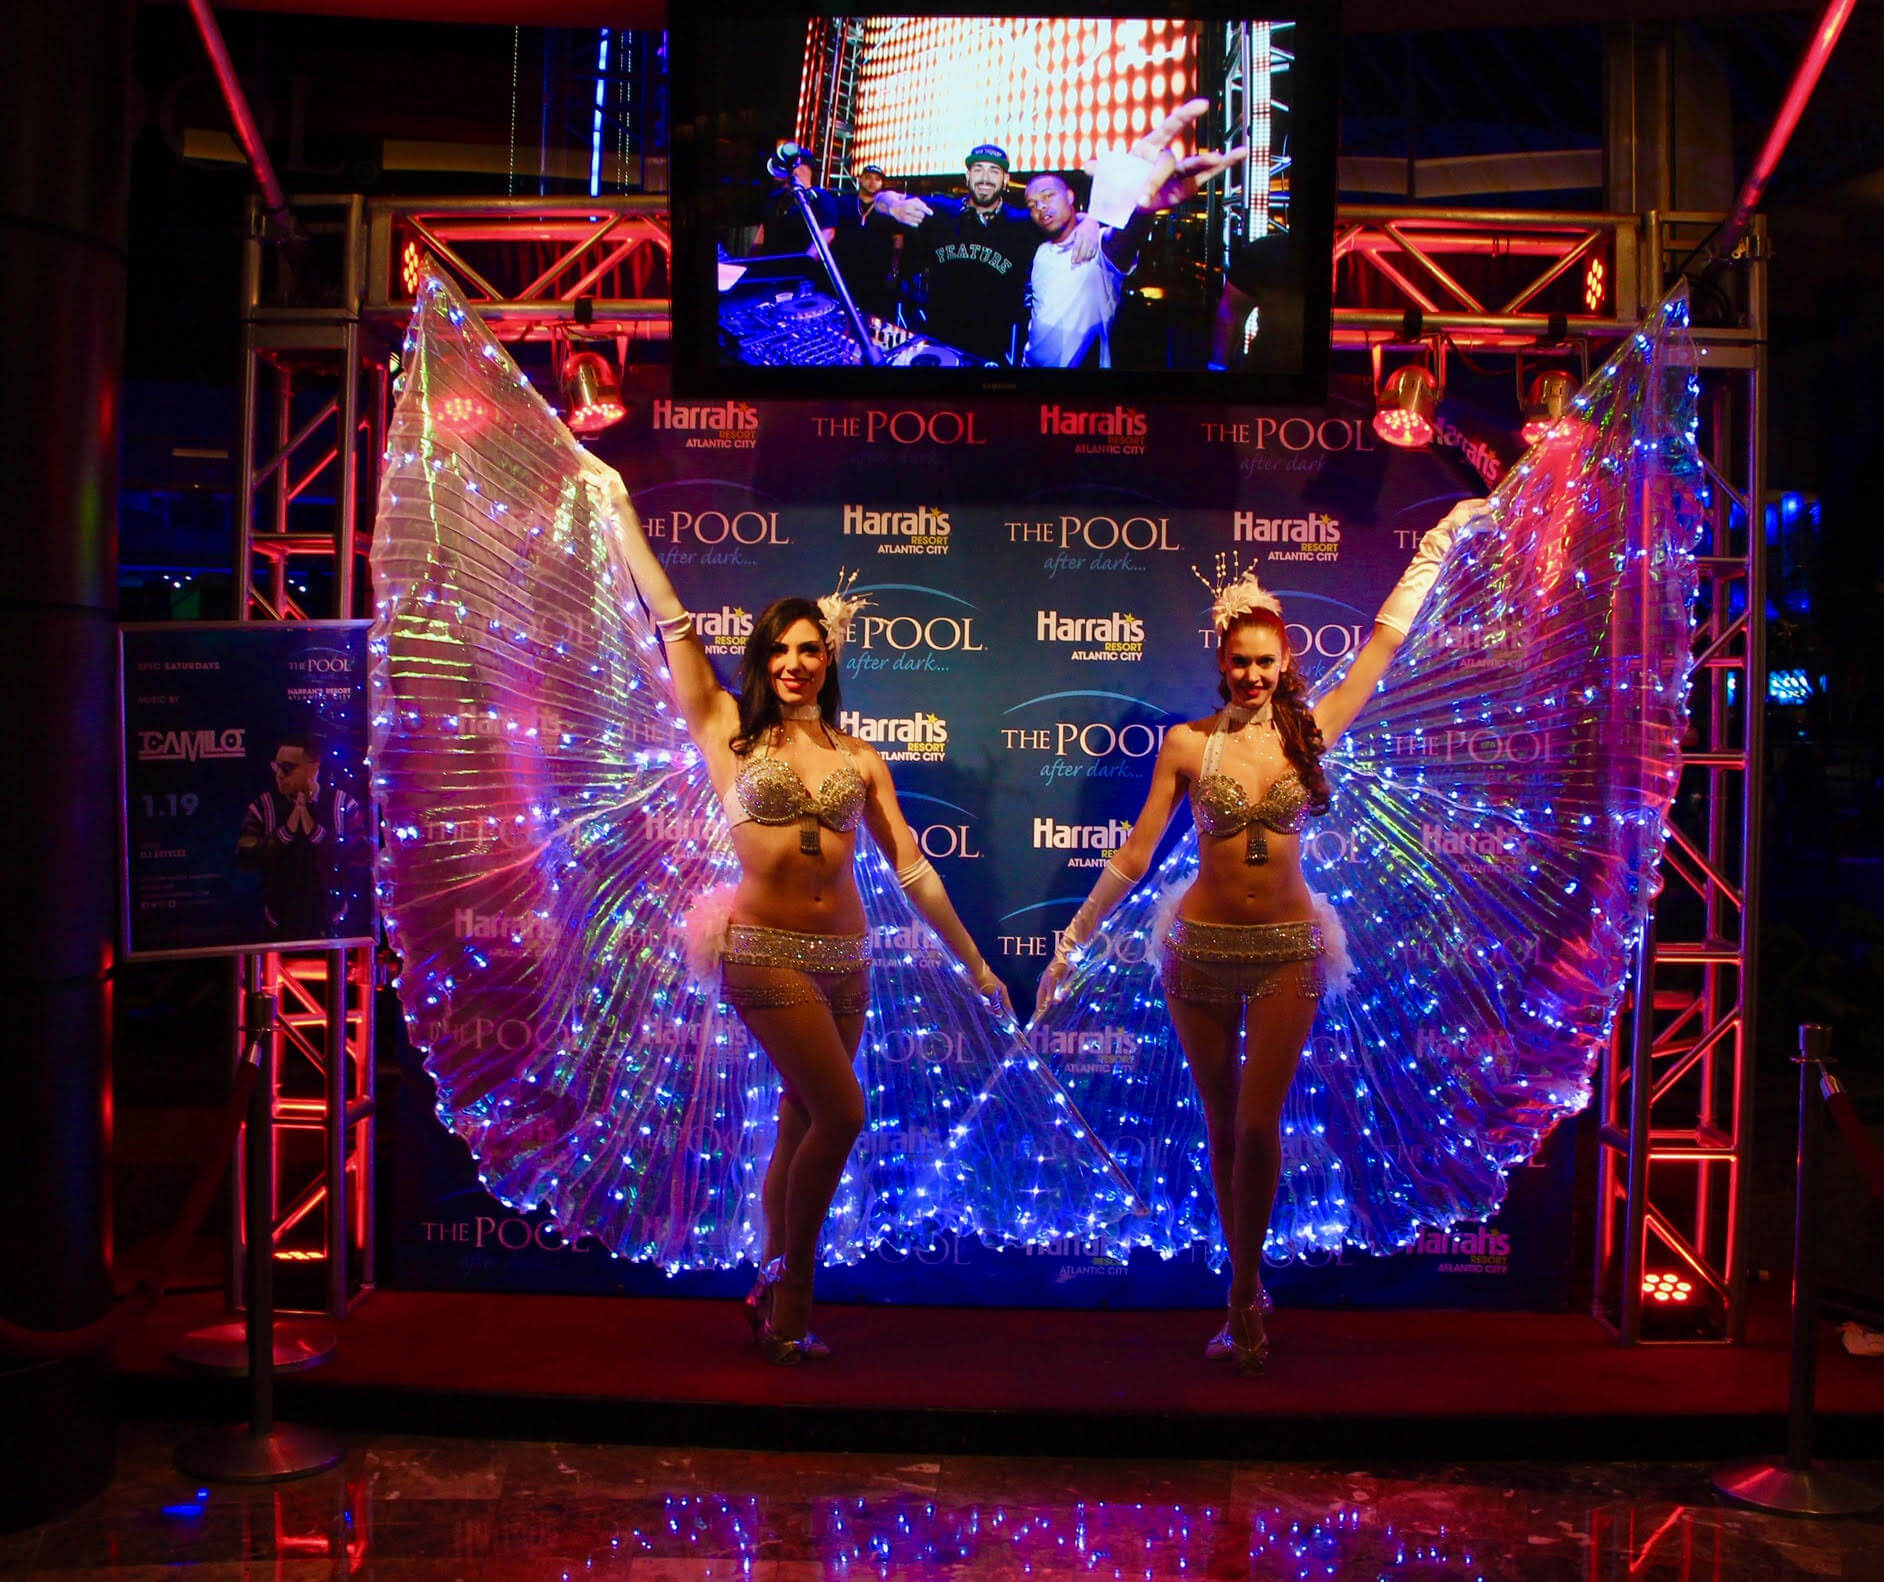 Two performers with led-lit wings stand on a stage at harrah's pool event, smiling and posing in front of a colorful backdrop.